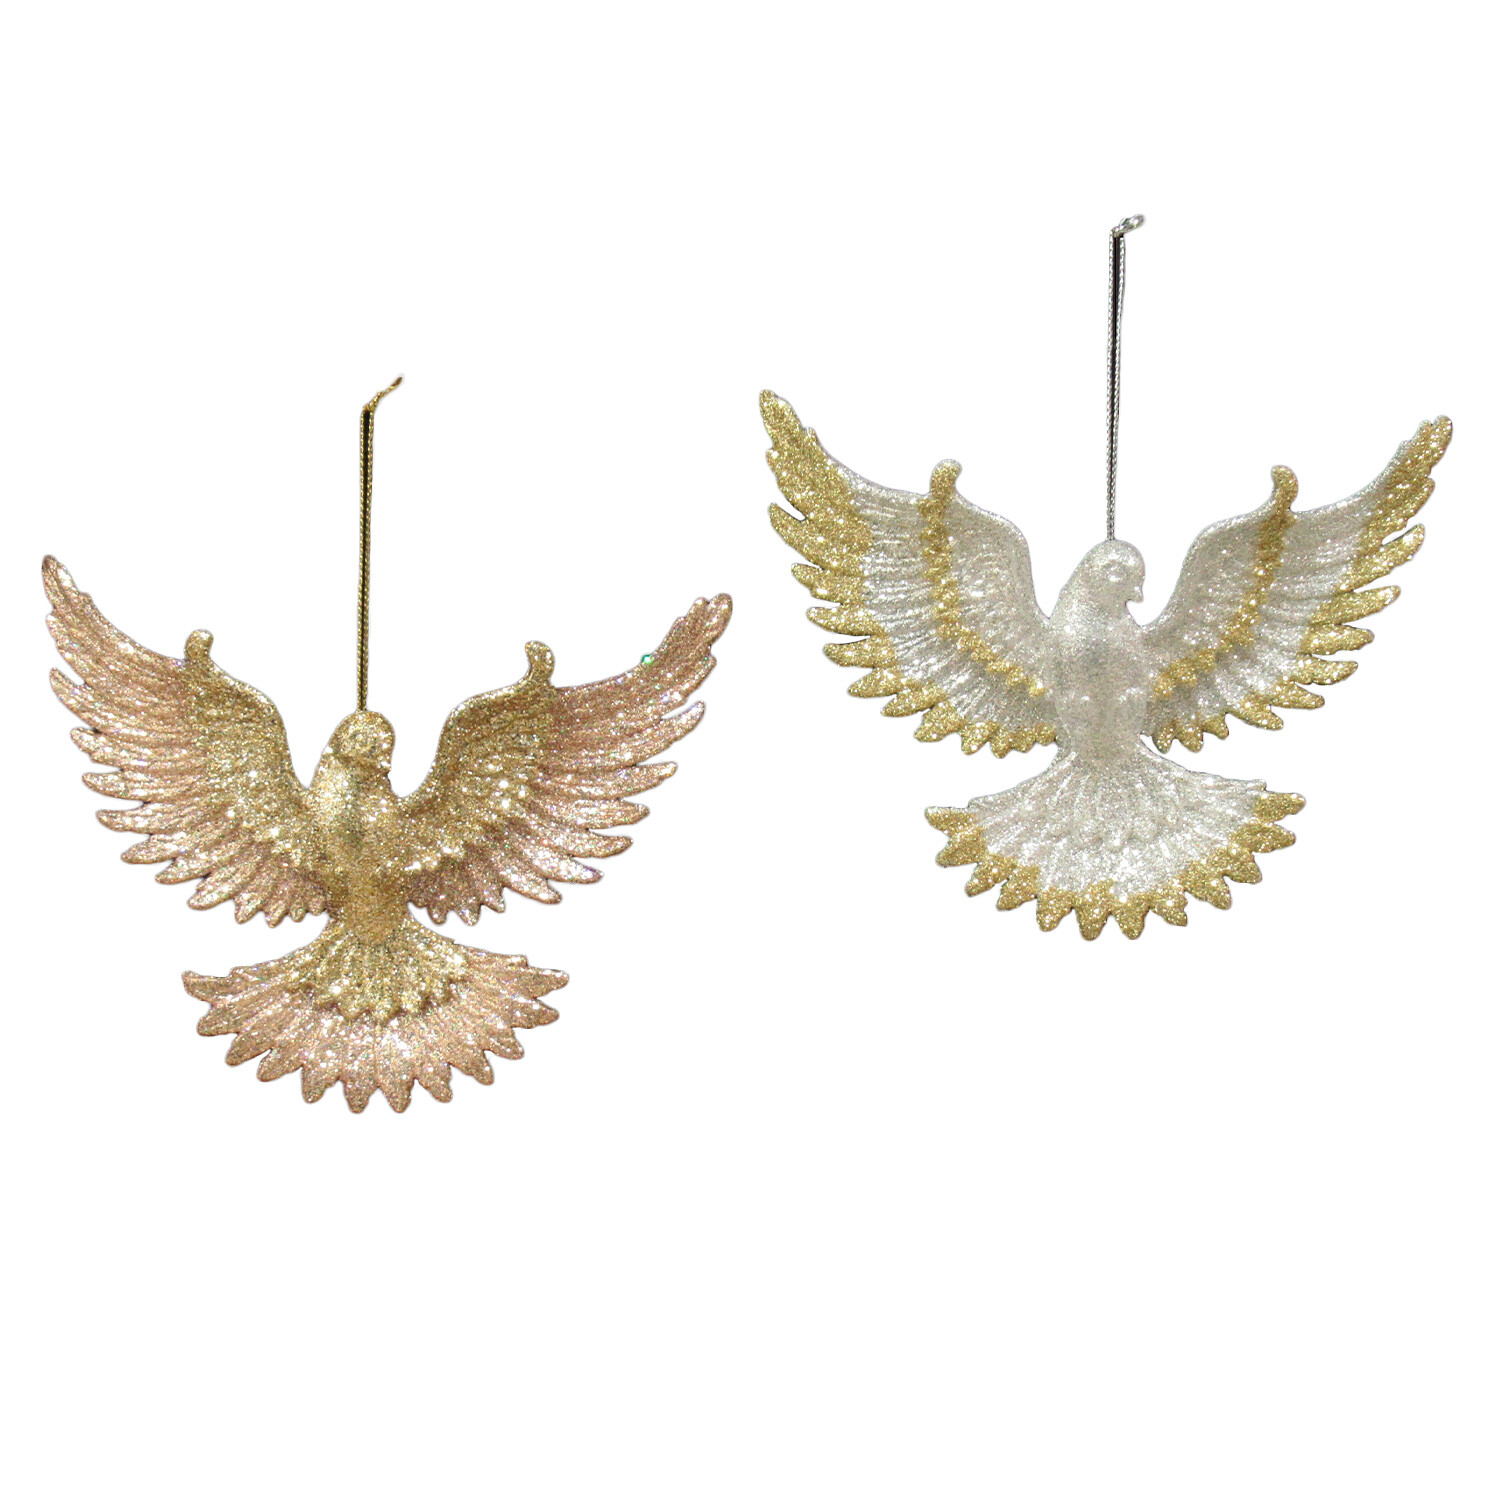 Single Grace & Glory Glitter Dove Ornament in Assorted styles Image